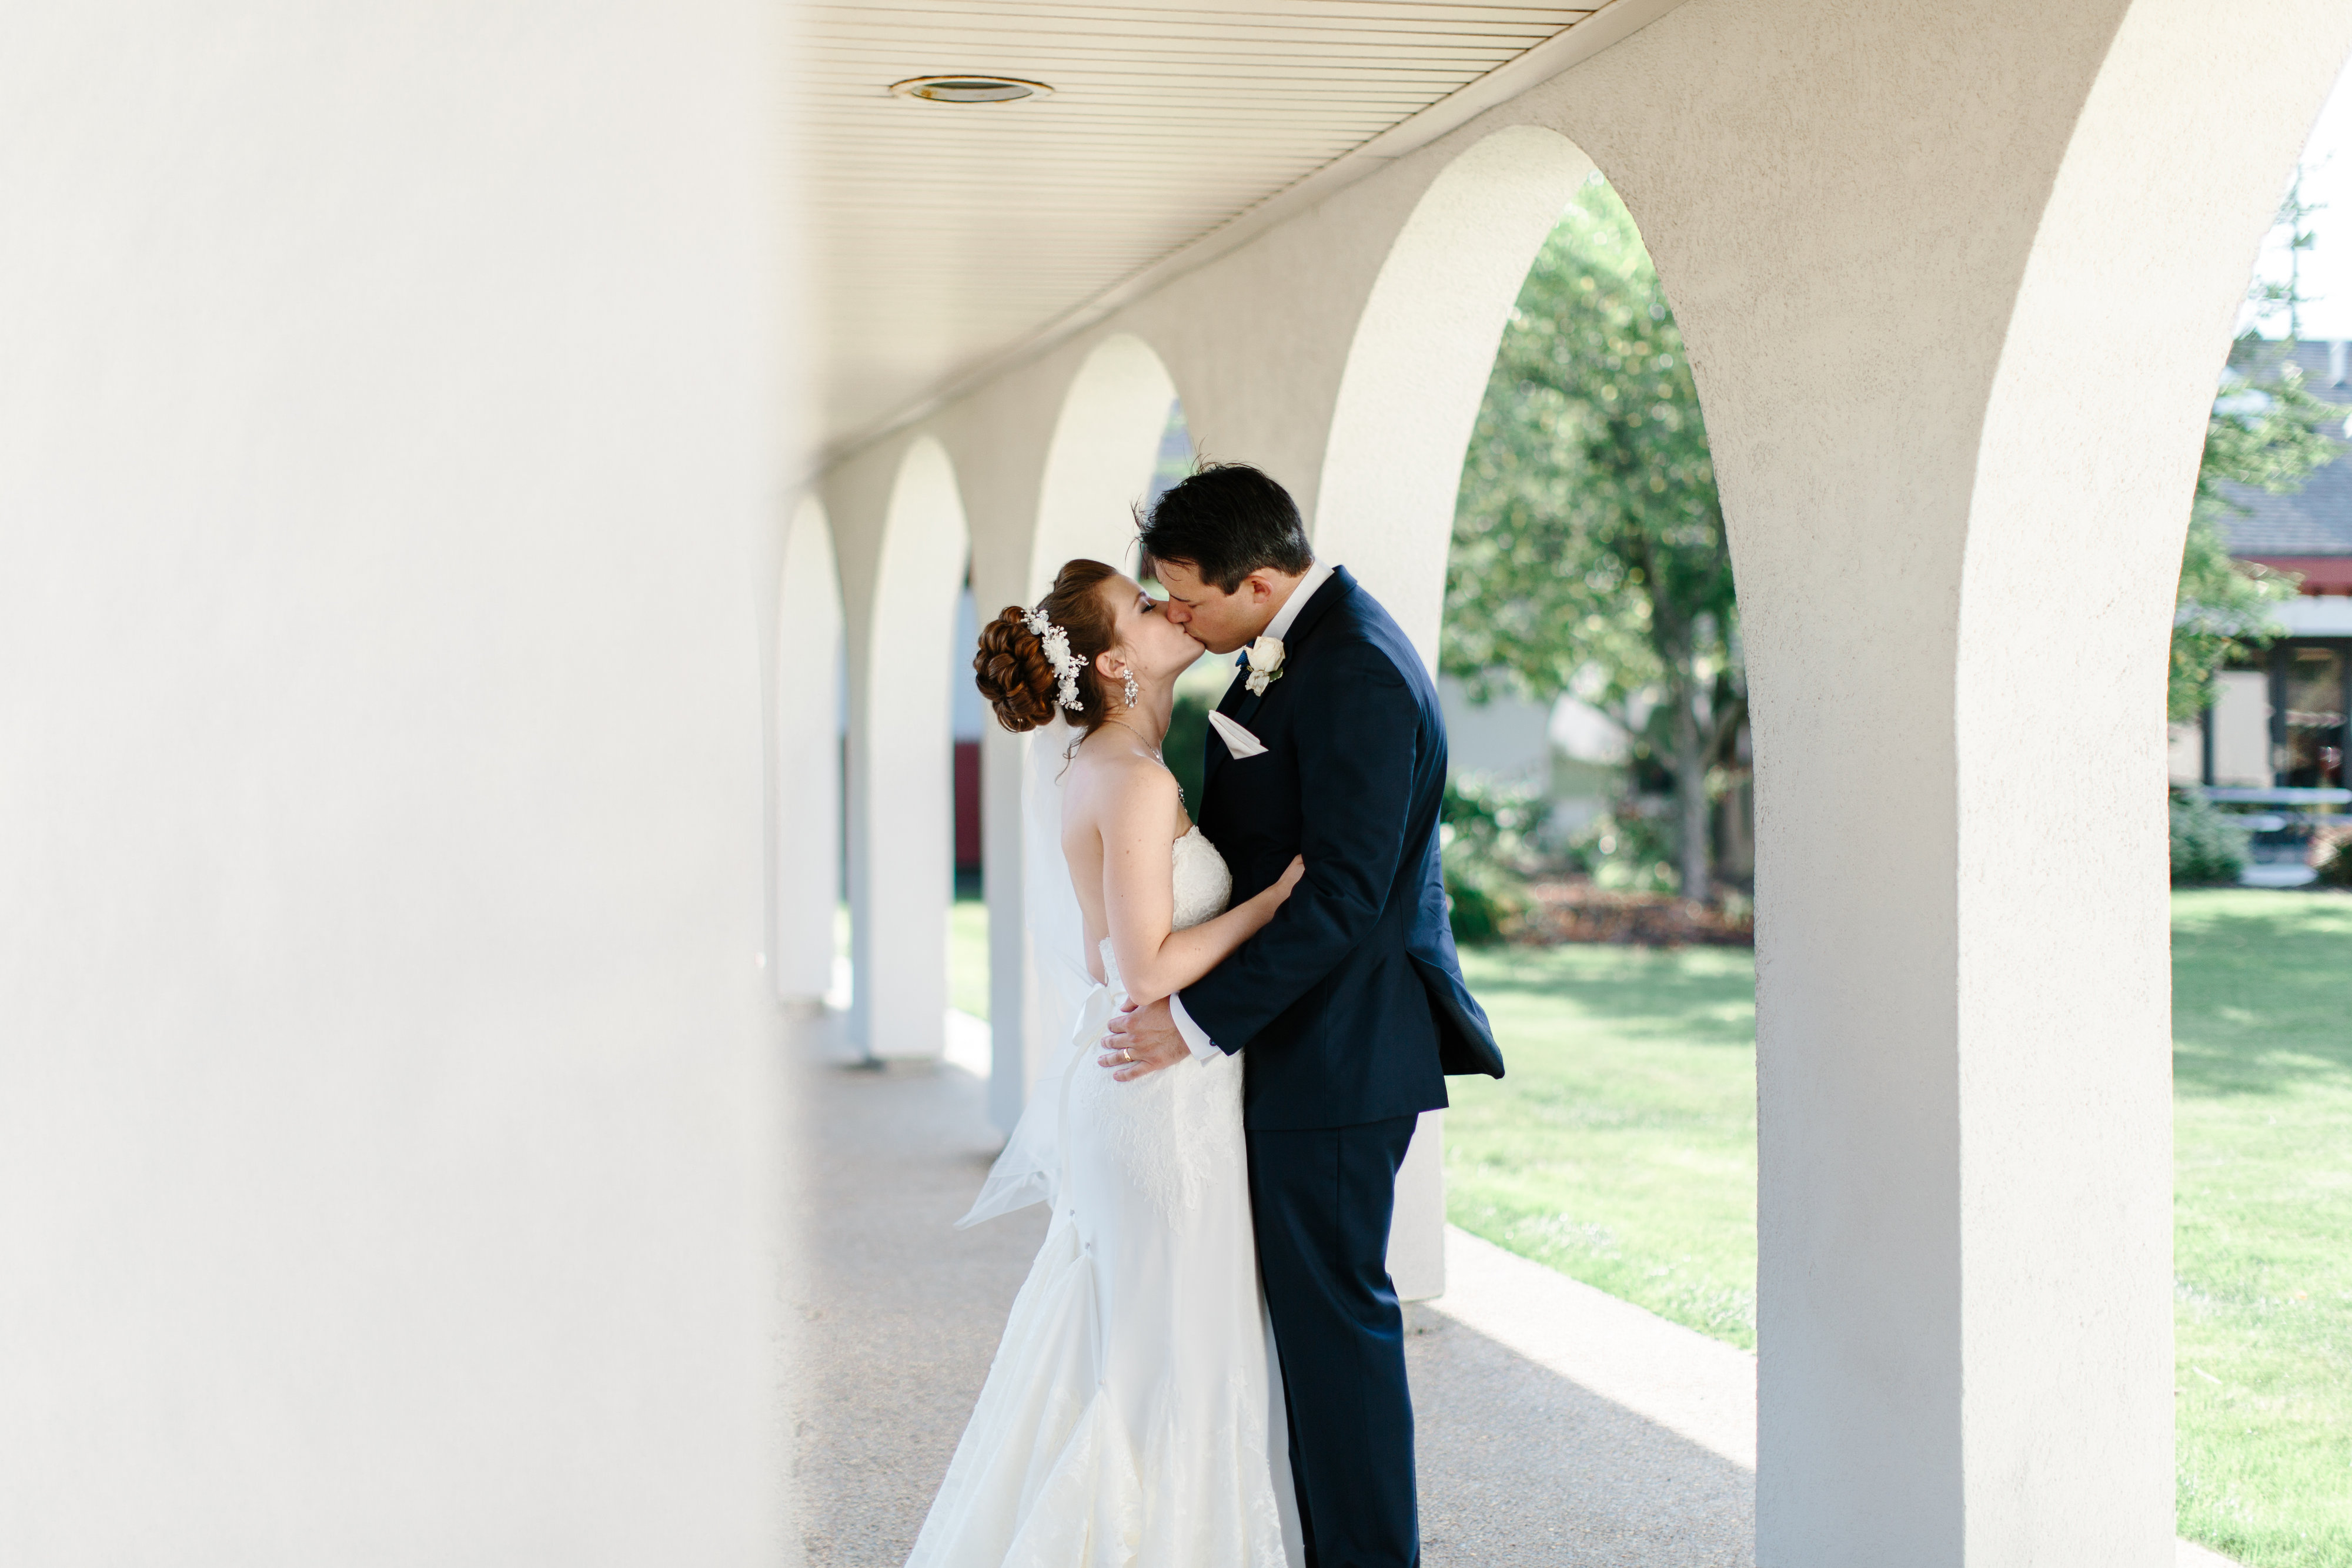 couple kiss under arch at navy and pink wedding reception